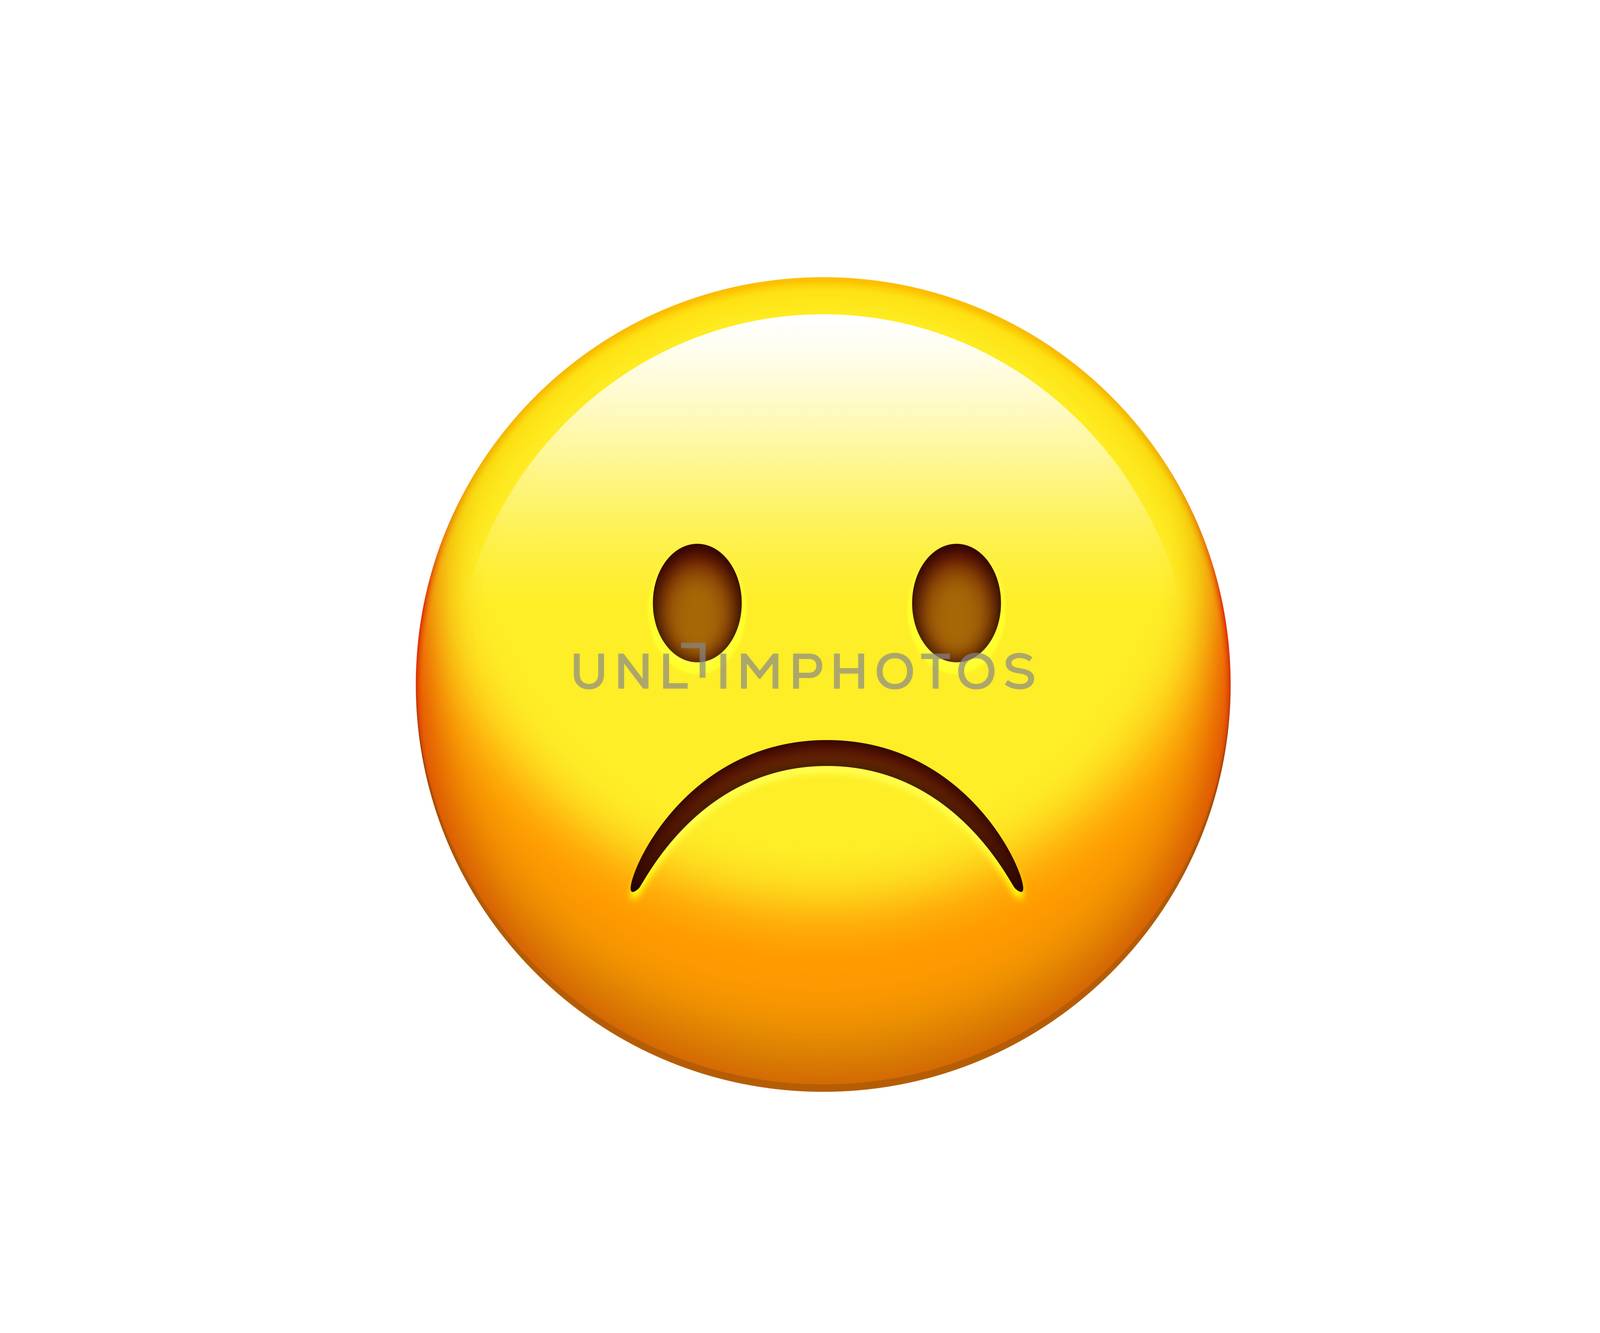 Isolated yellow unhappy, upset face icon by cougarsan